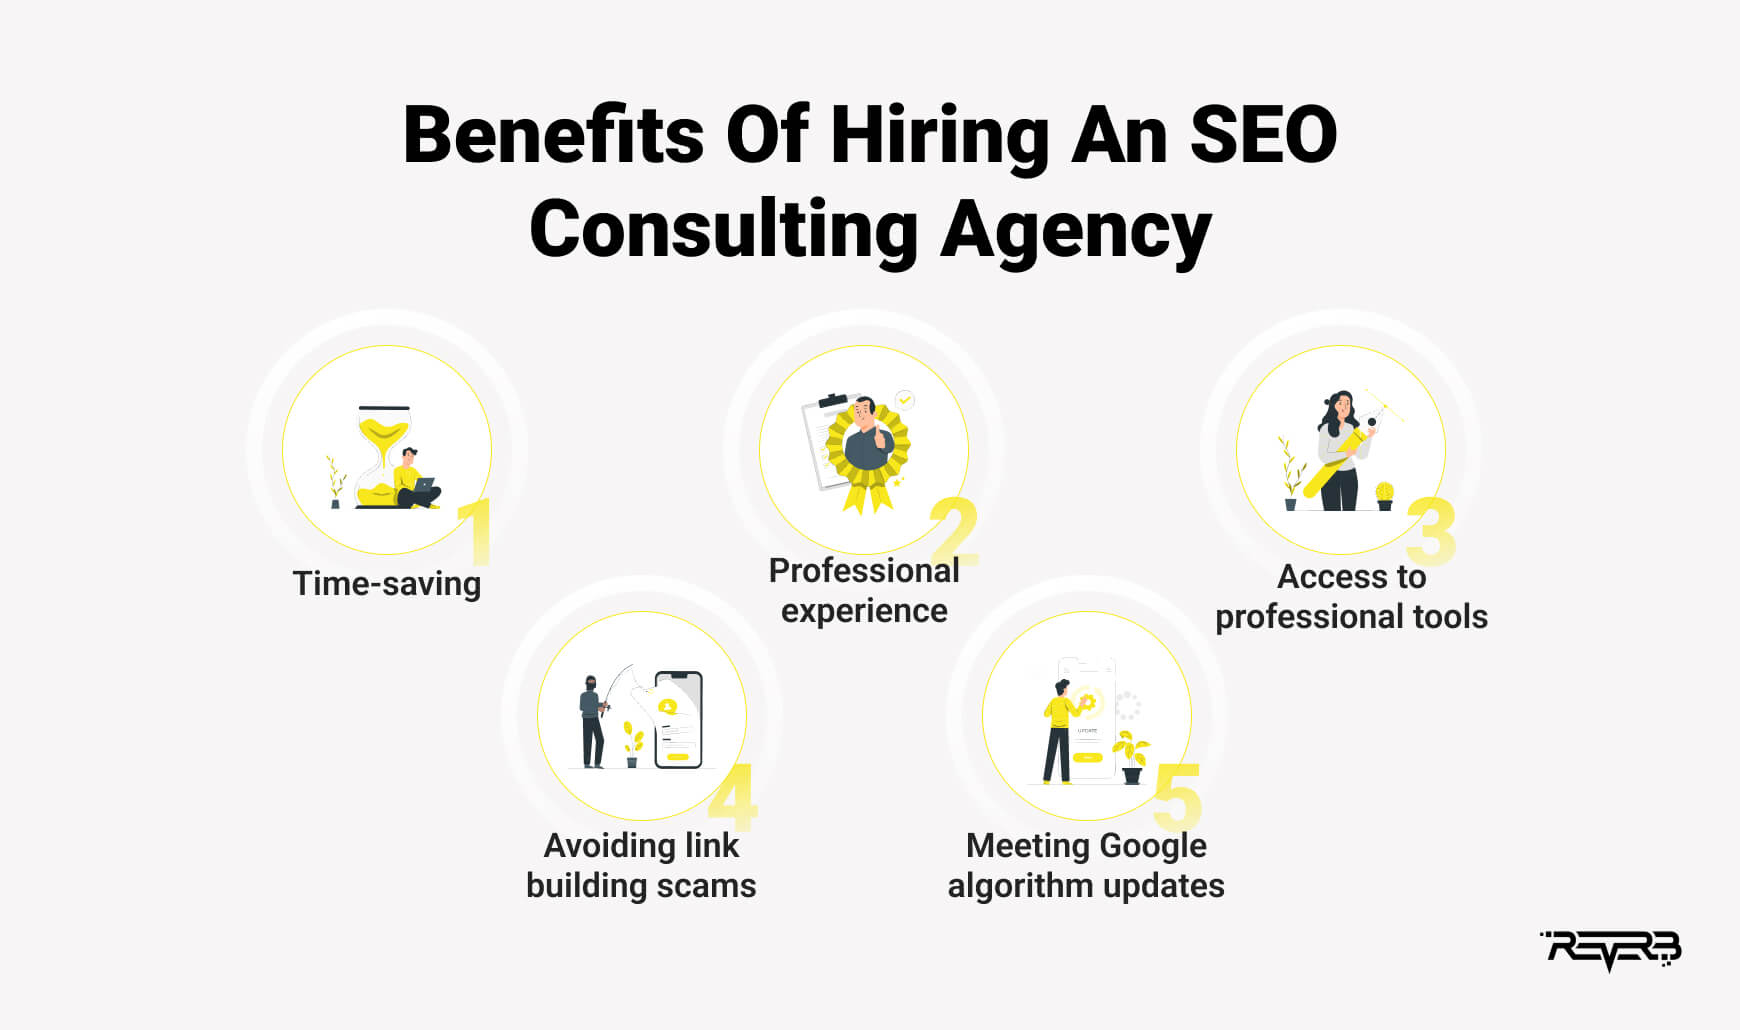 Benefits Of Hiring An SEO Consulting Agency